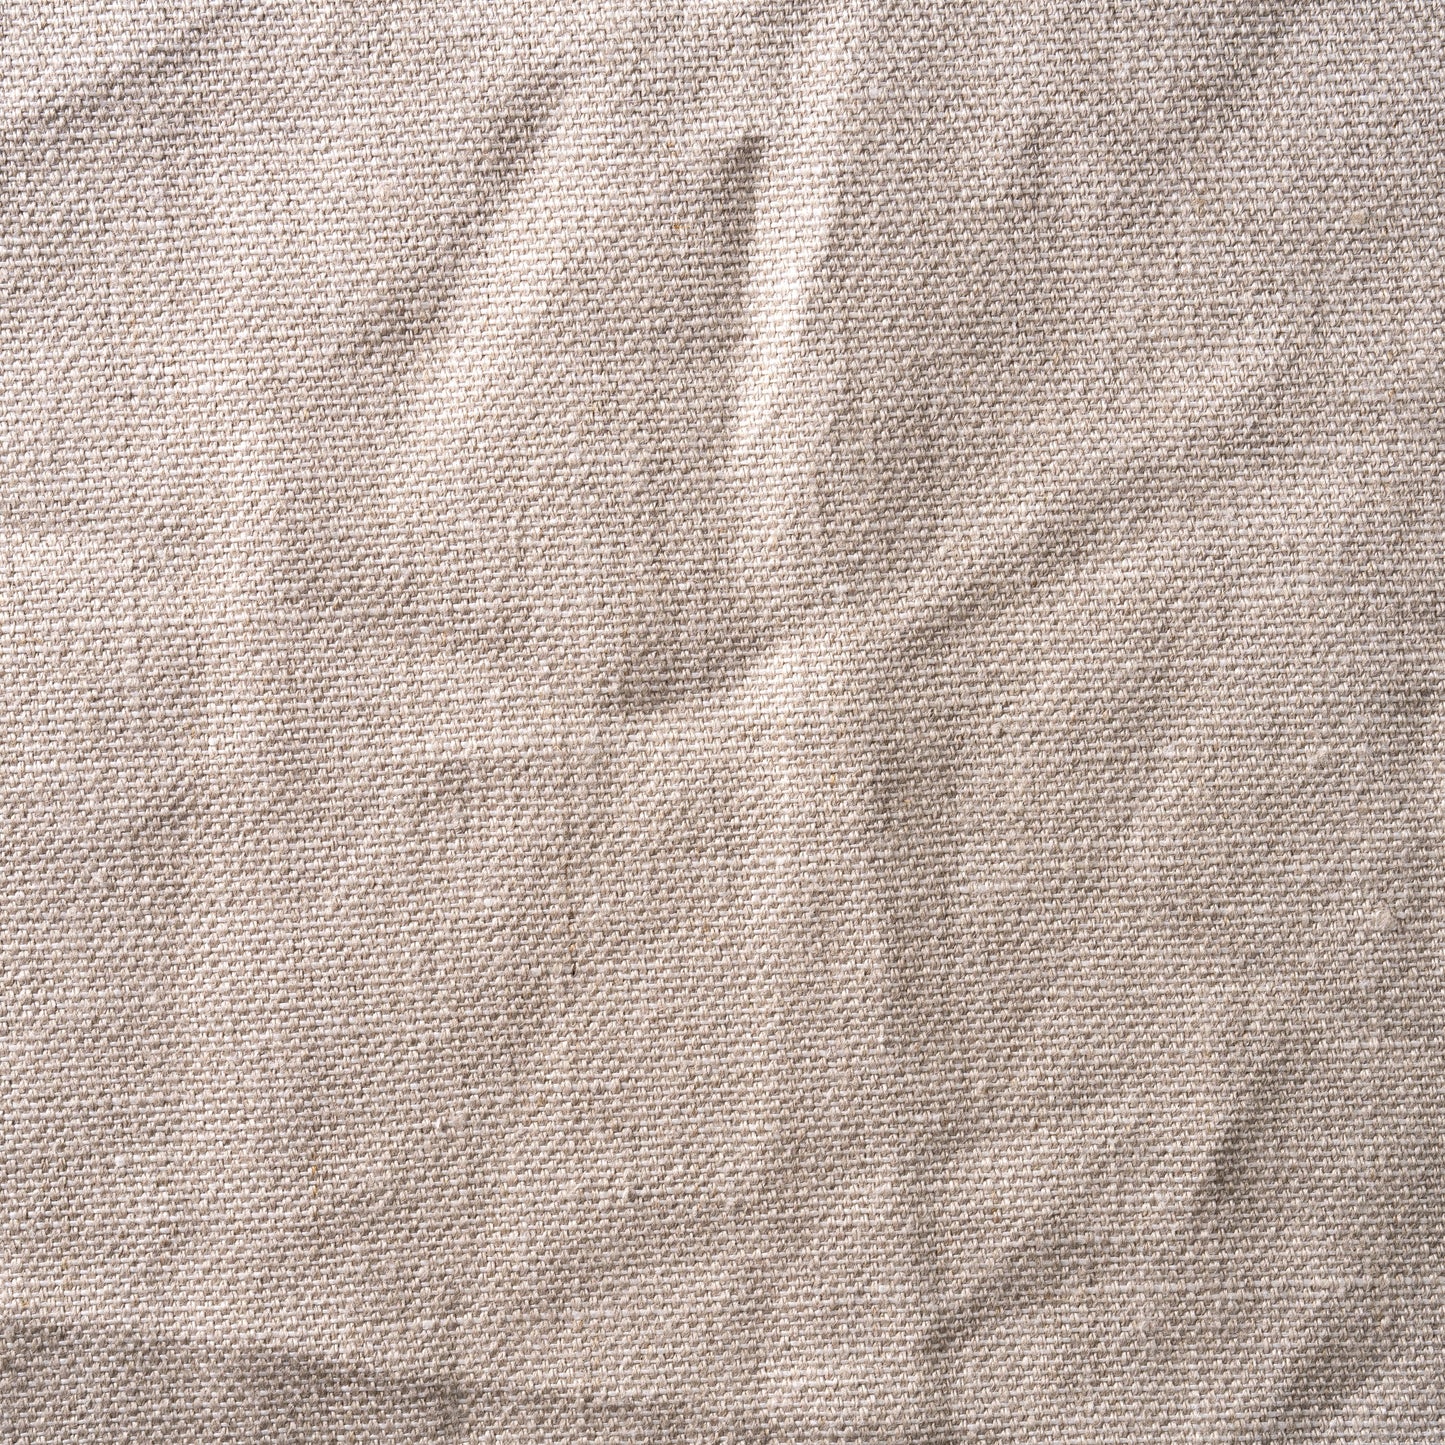 11 oz/sq yard 100% Home Furnishing Weight Linen in Mixed Natural Swatch